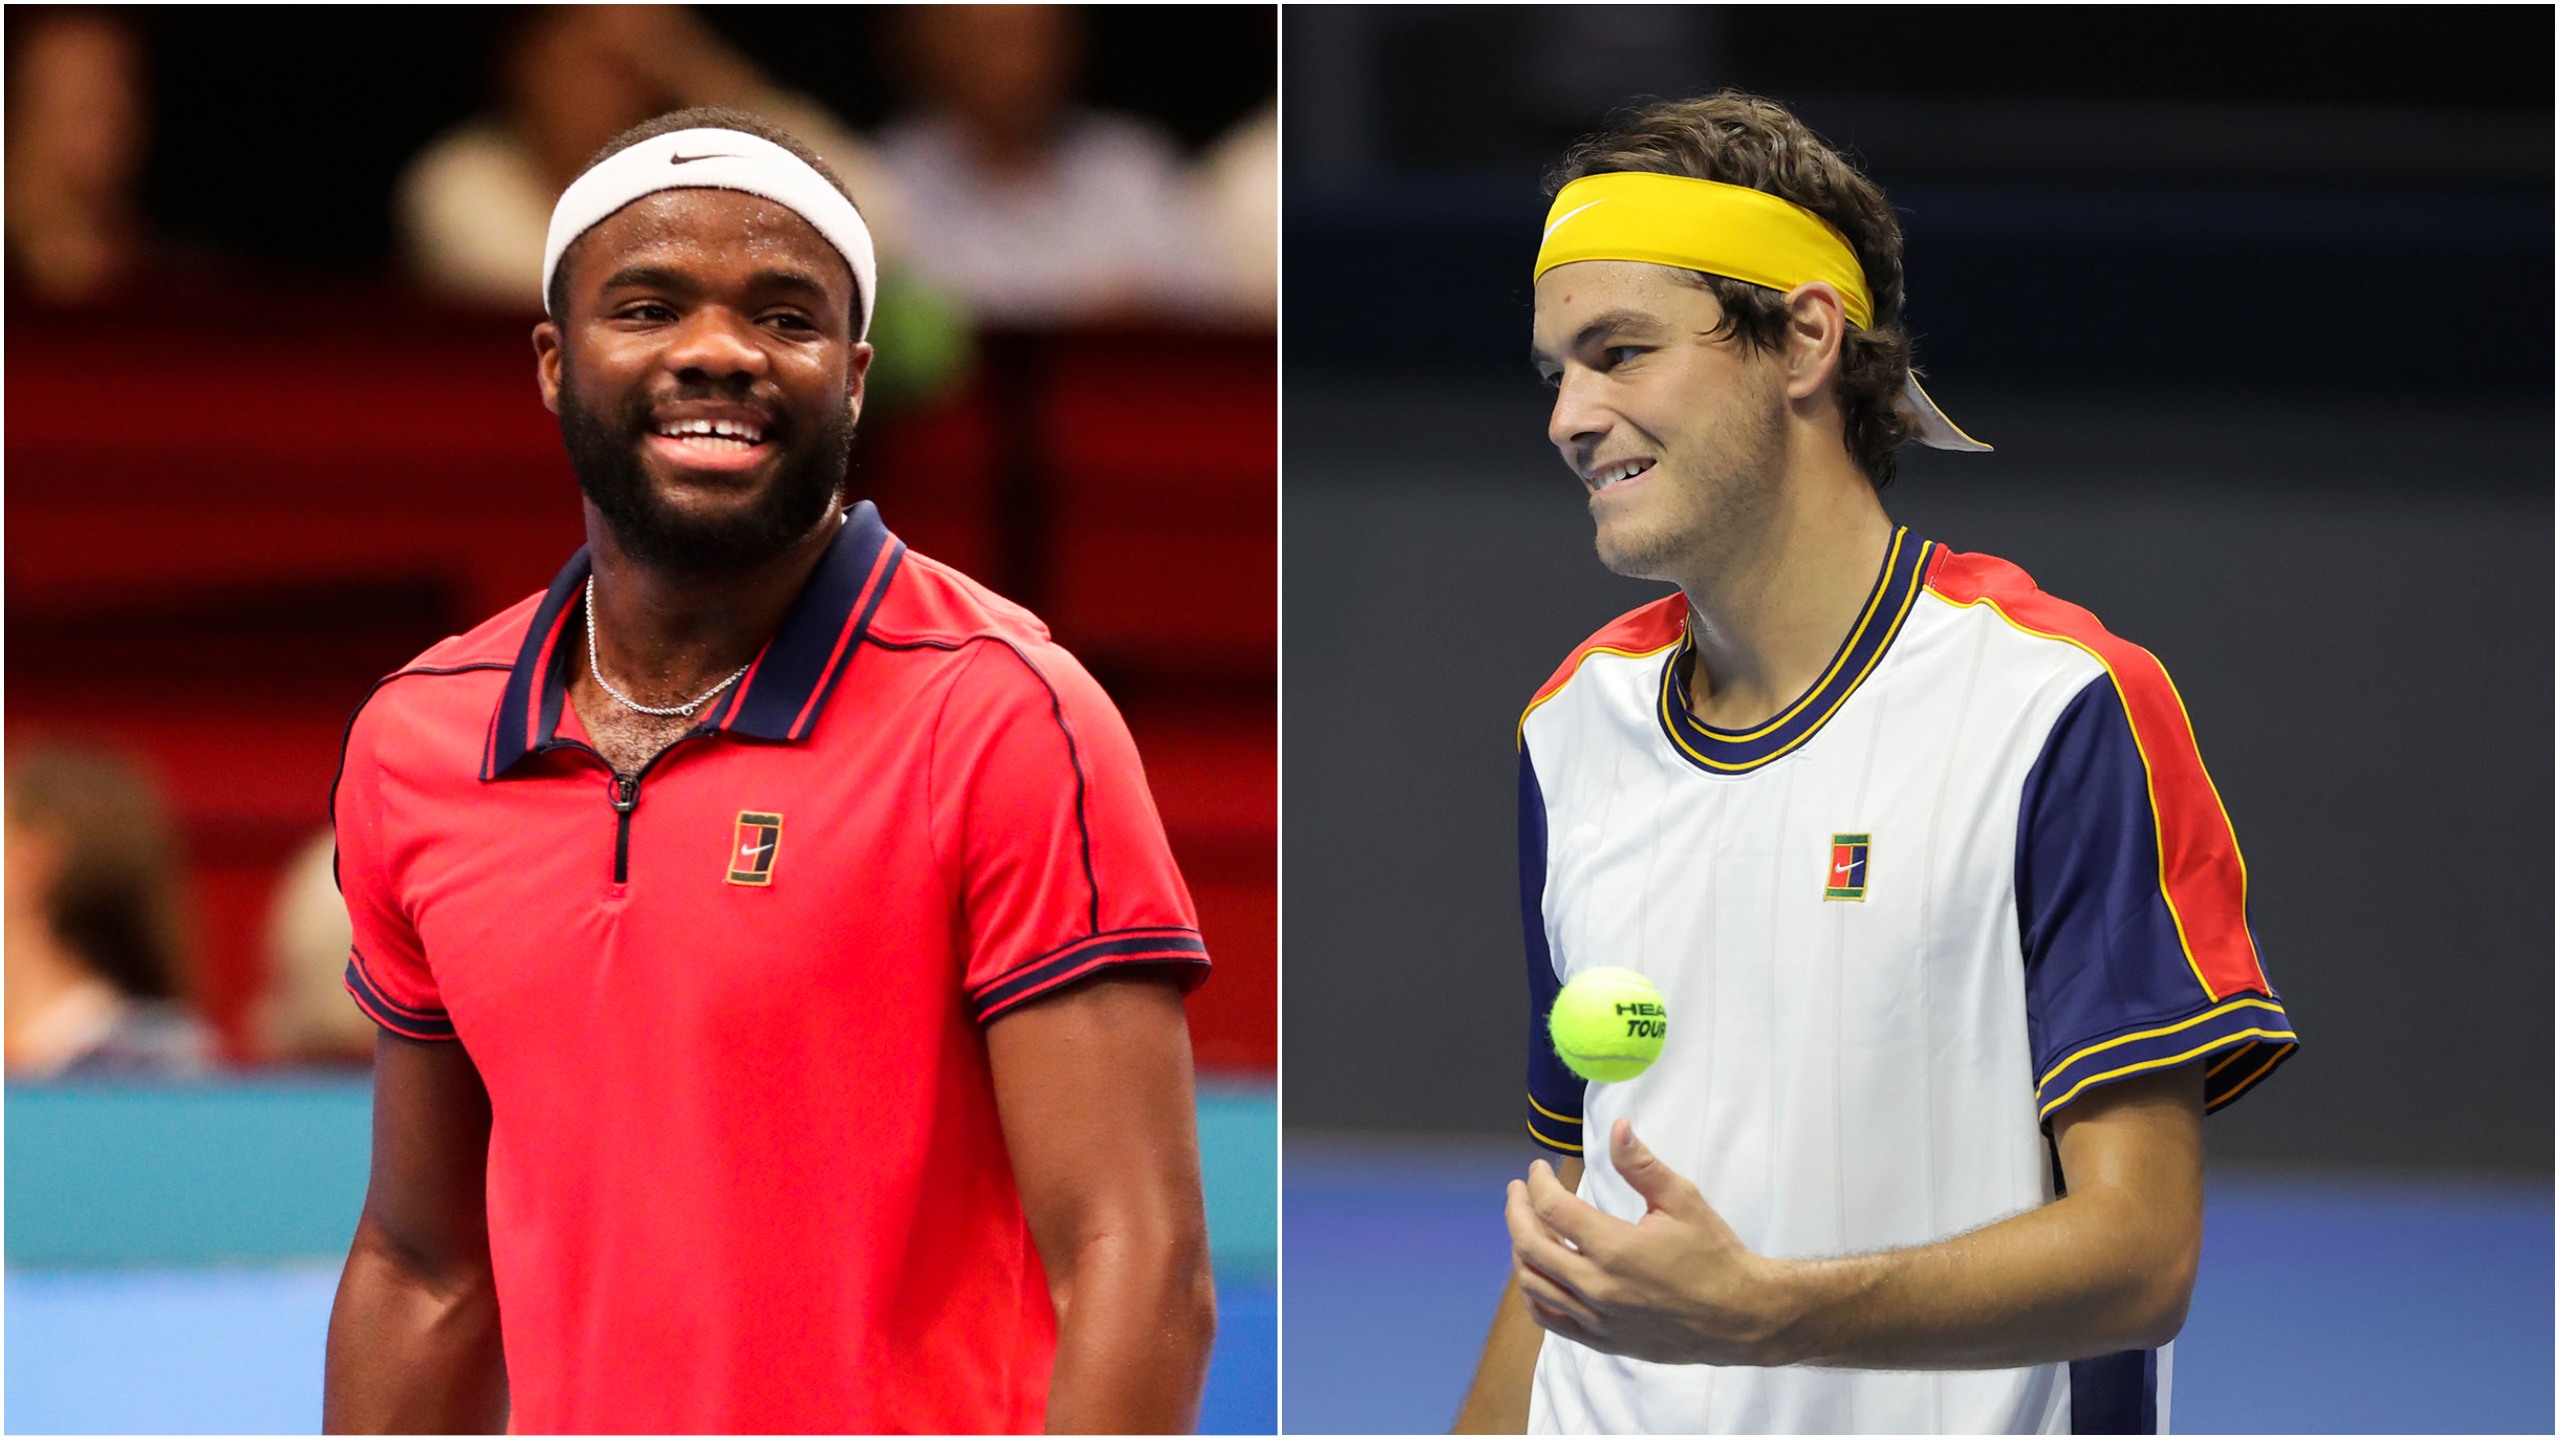 Frances Tiafoe and Taylor Fritz each come up short in finals, but remain clearly on the ascent